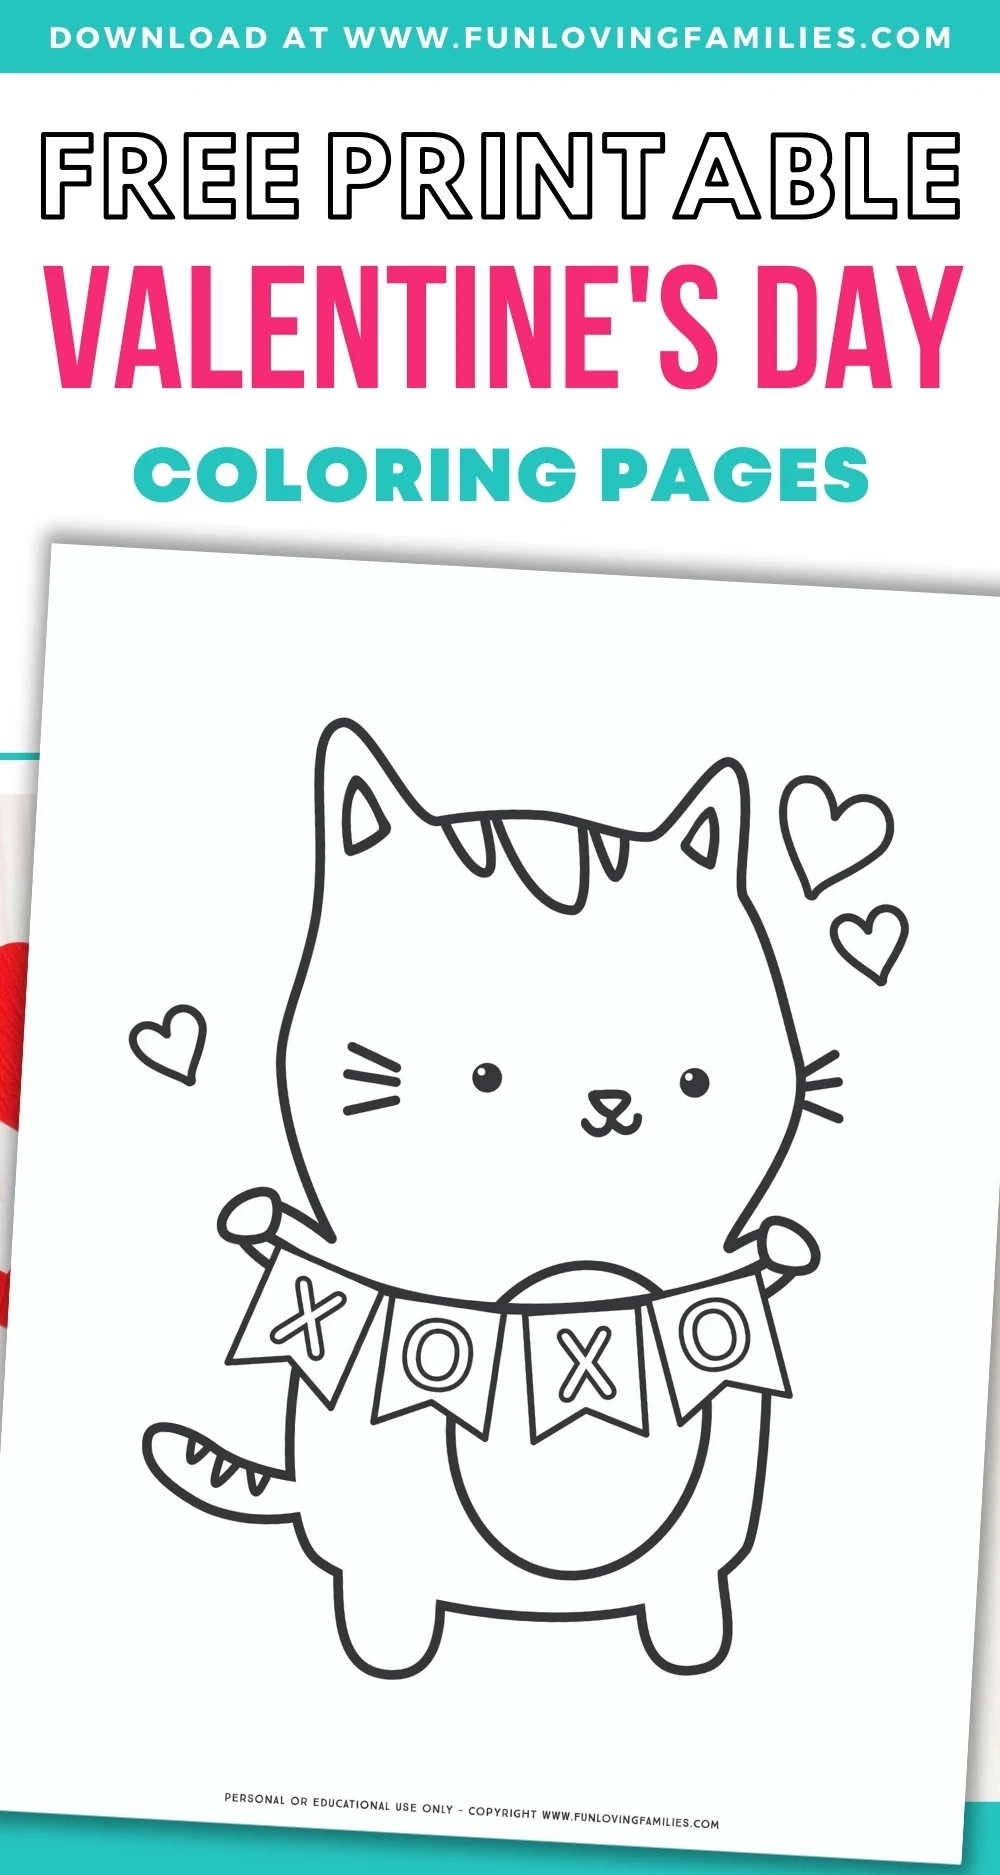 Valentine's Day Coloring Pages - Fun Loving Families